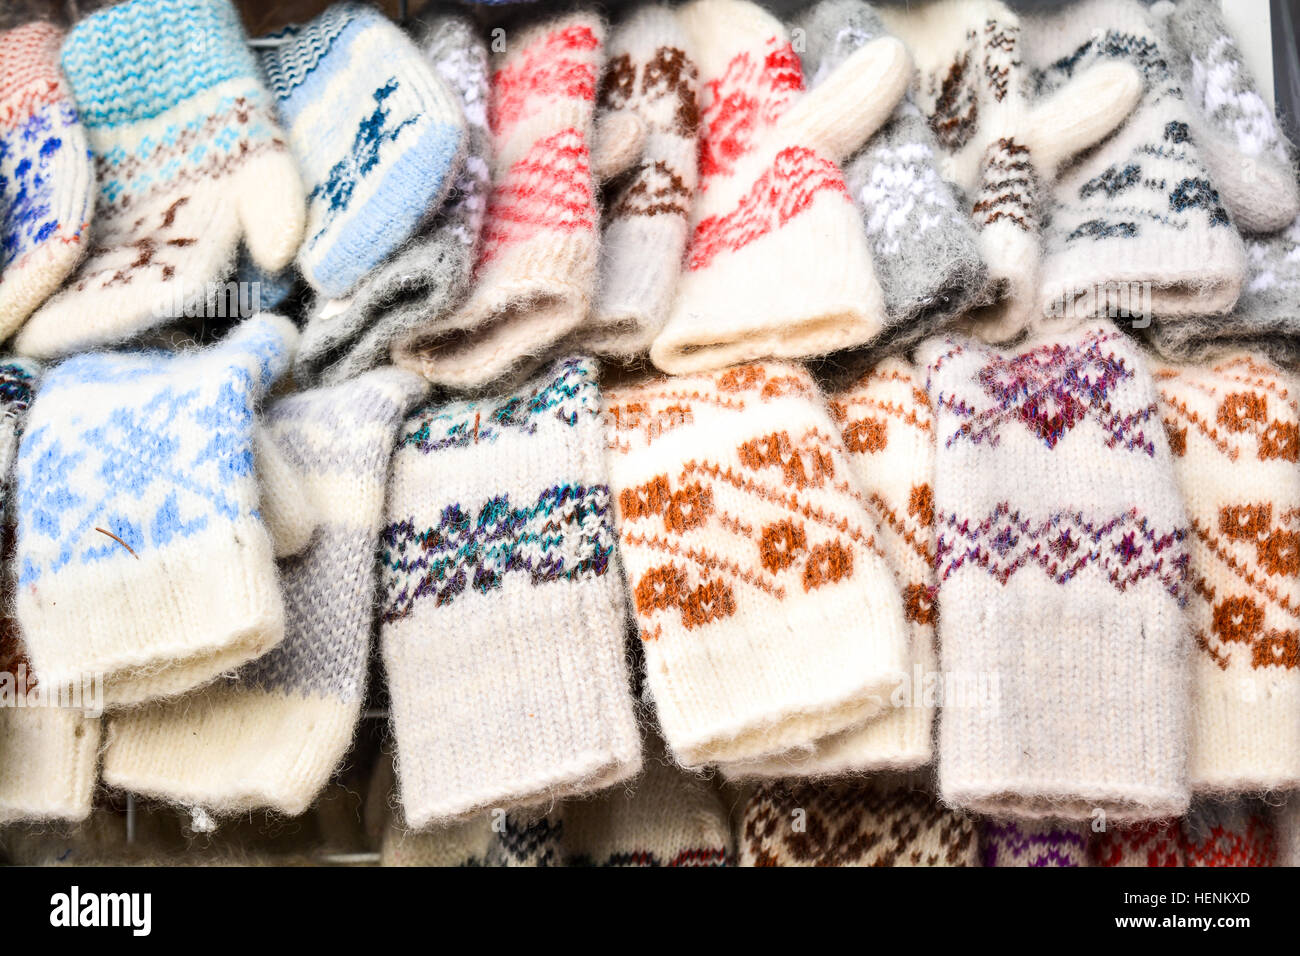 Different hand made wool gloves for winter season at market. Stock Photo